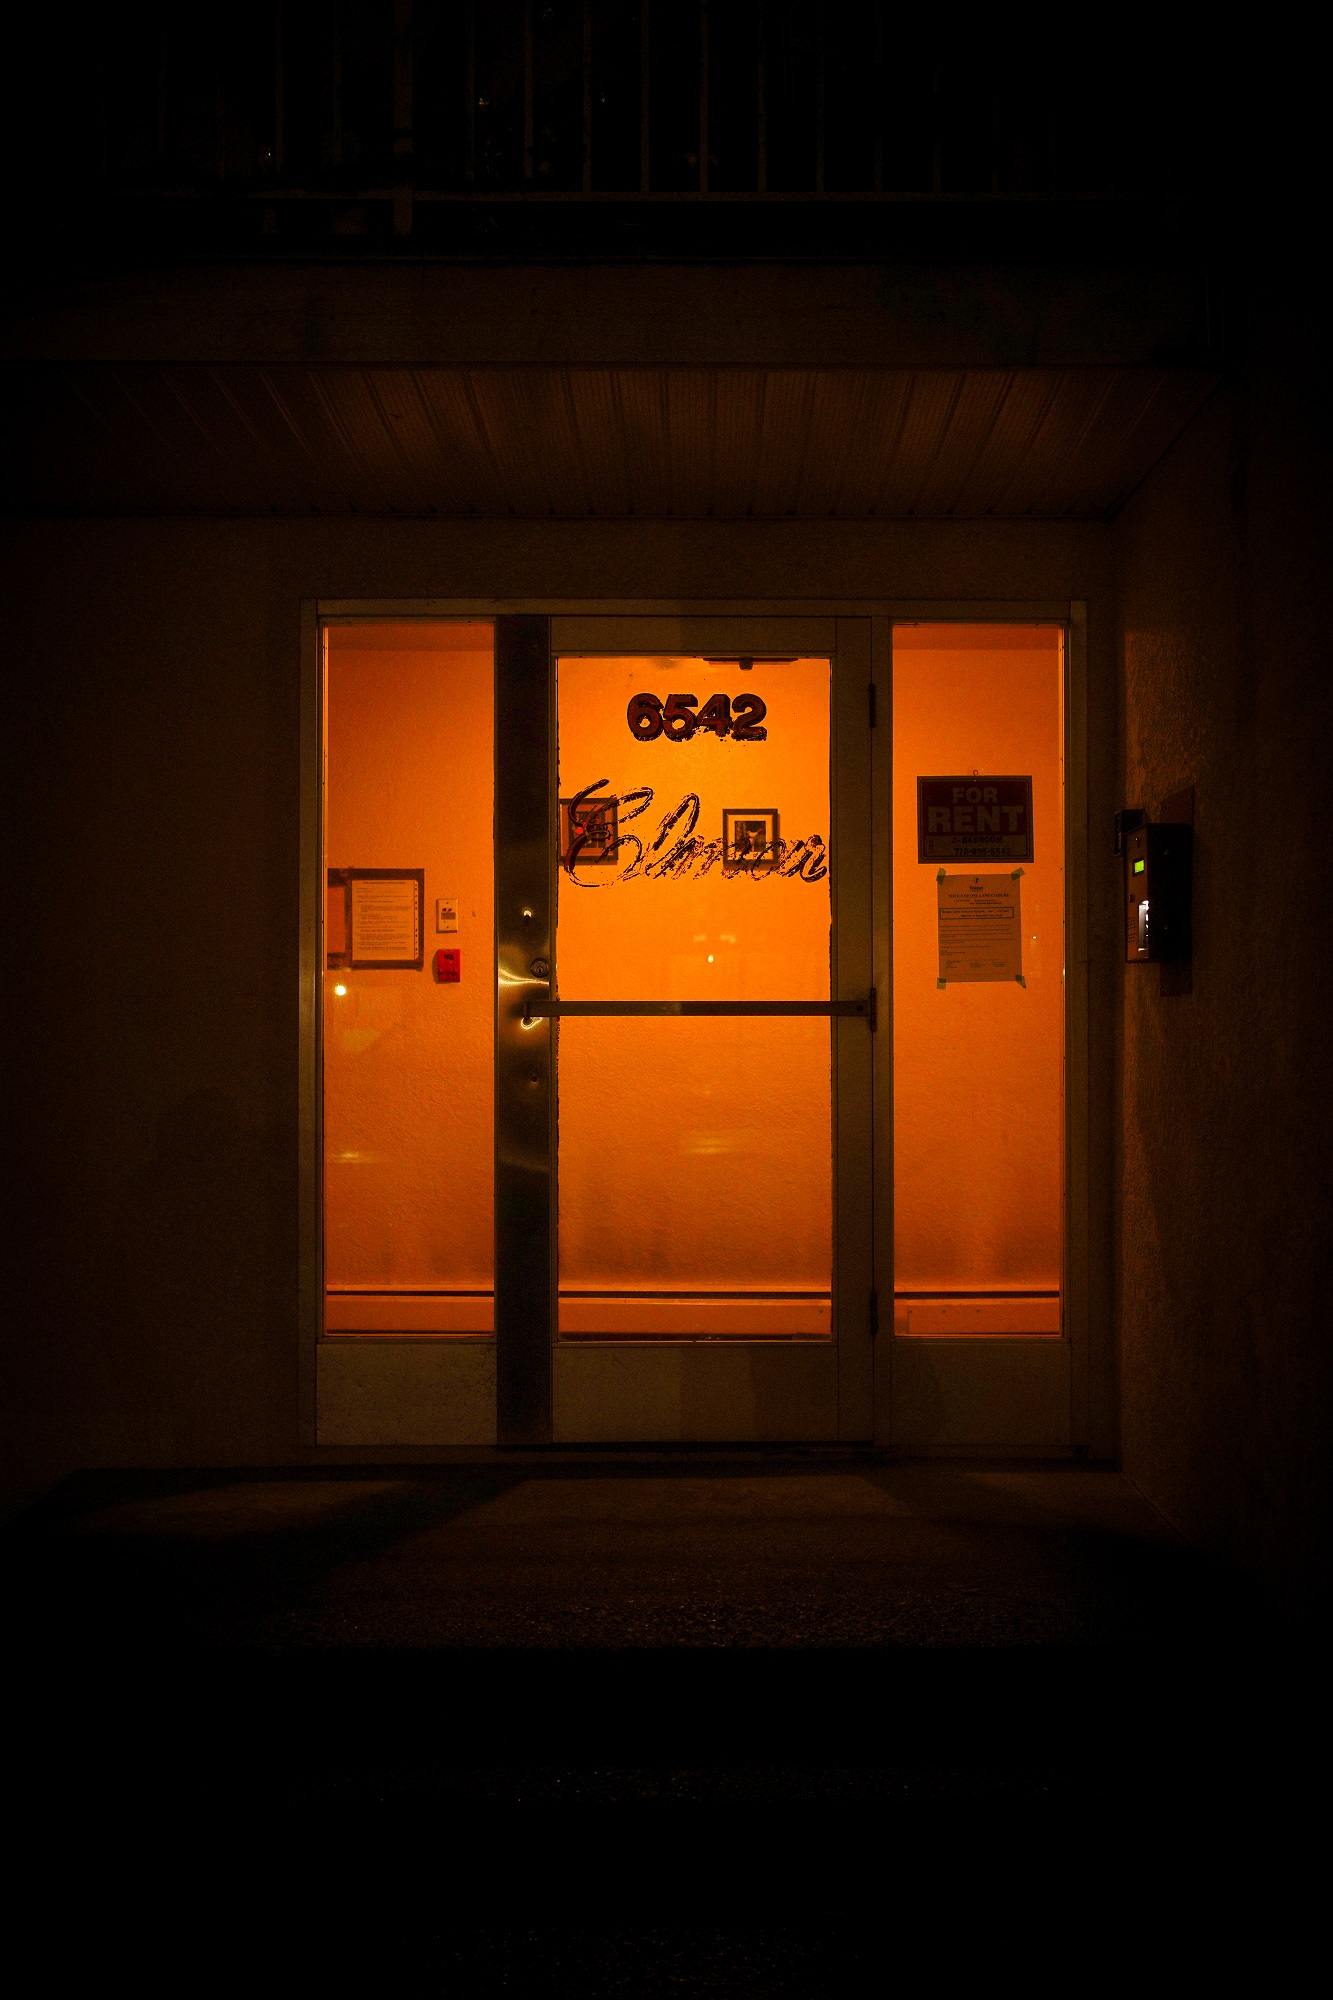 The entryway of an apartment building at night. The name 'Elmar' can just be made out on the door, the paint fading.